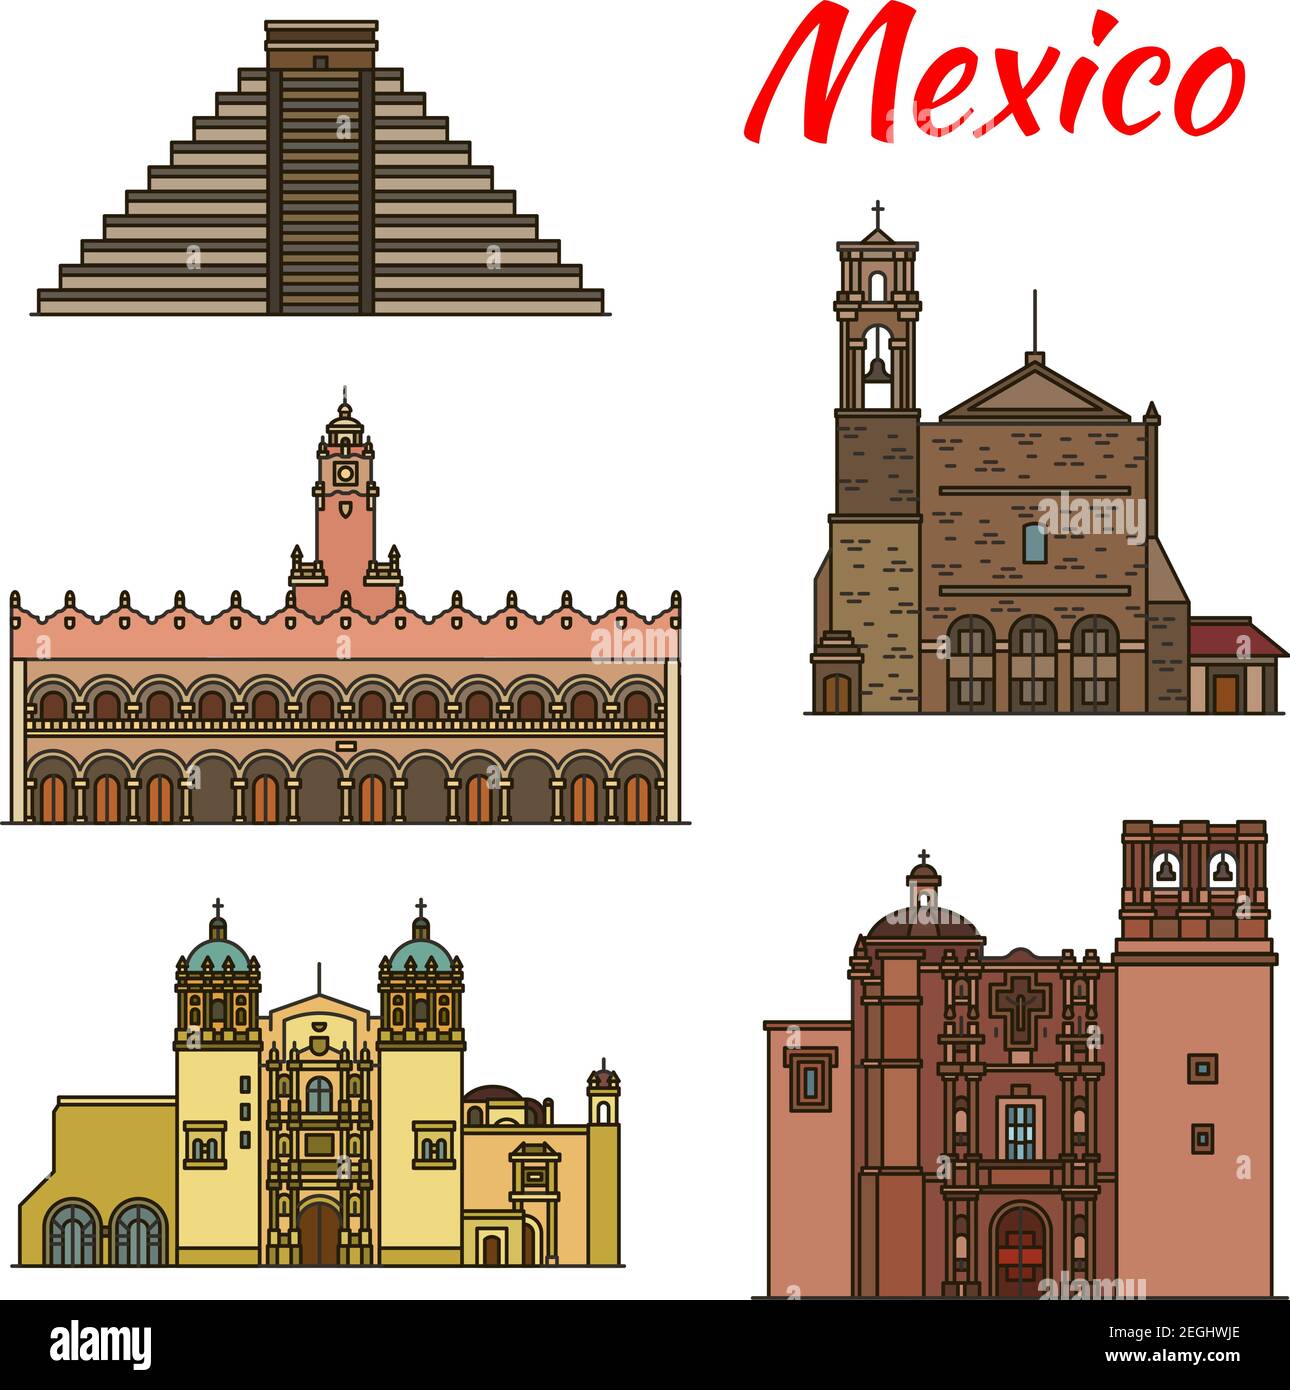 Travel landmark of Mexican and North American architecture icon set. Ancient Aztec Pyramid of Chichen Itza, Merida City Hall and Sacromonte Church, Mo Stock Vector